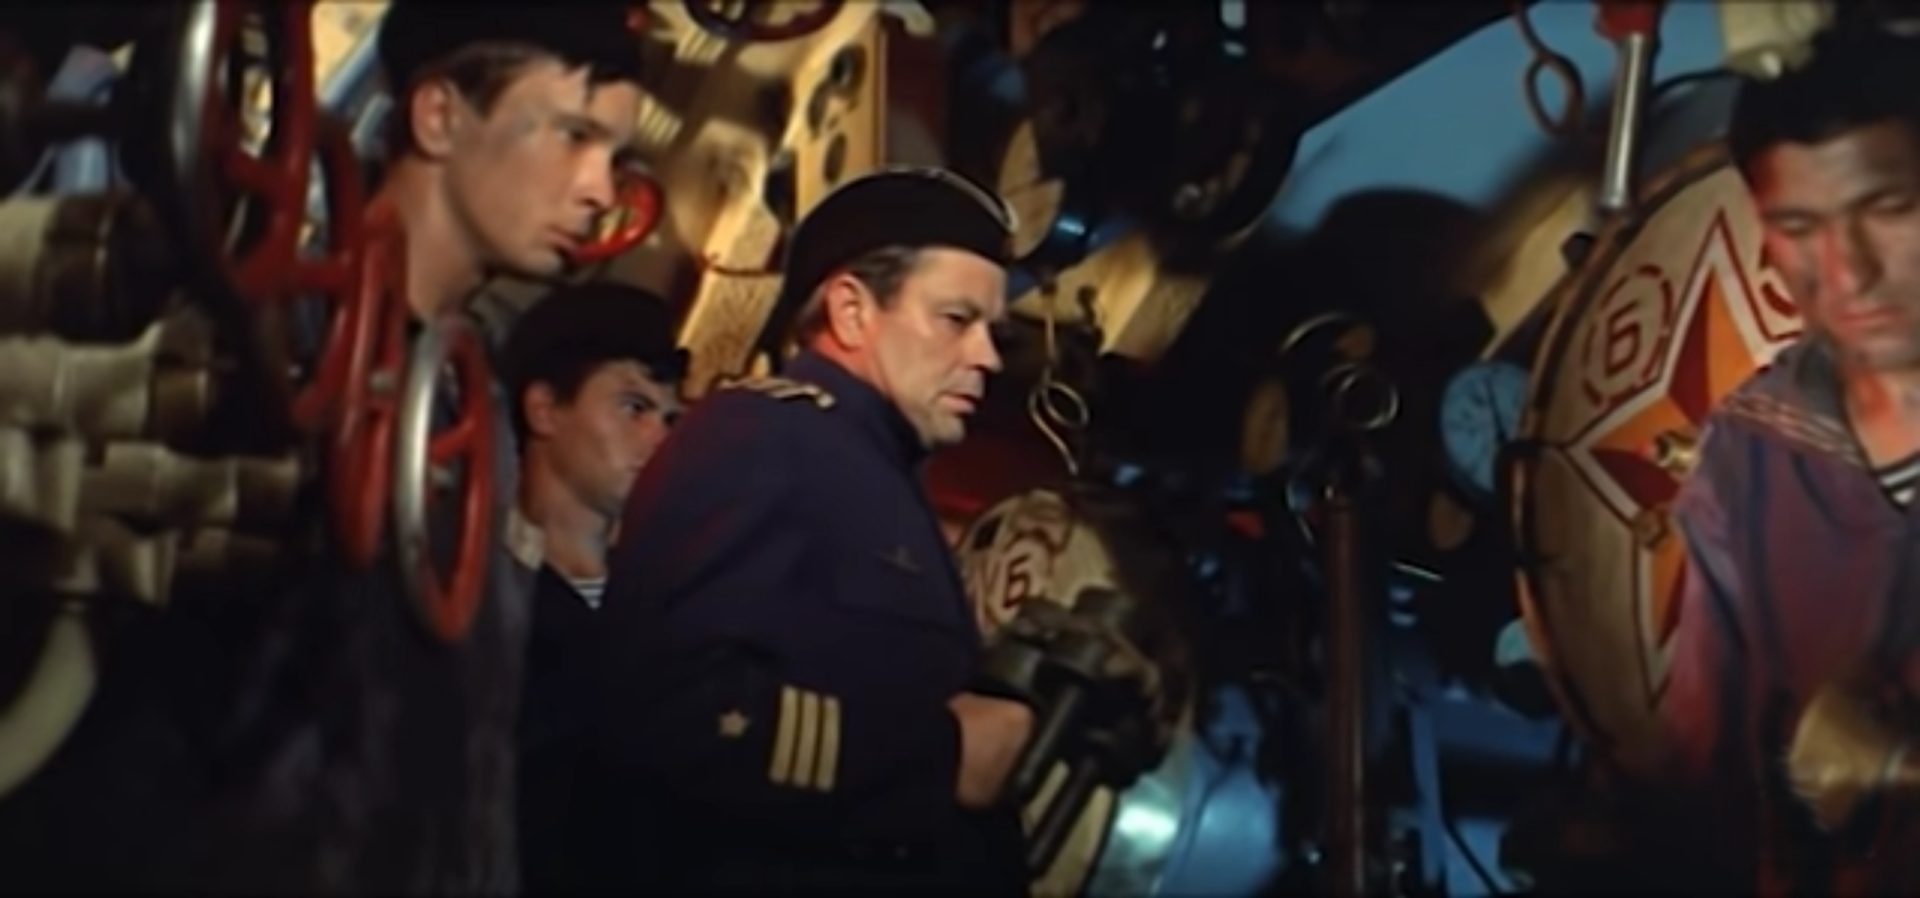 Soviet submarine pilots in the torpedo room in a tense atmosphere, filmed from a low angle view.